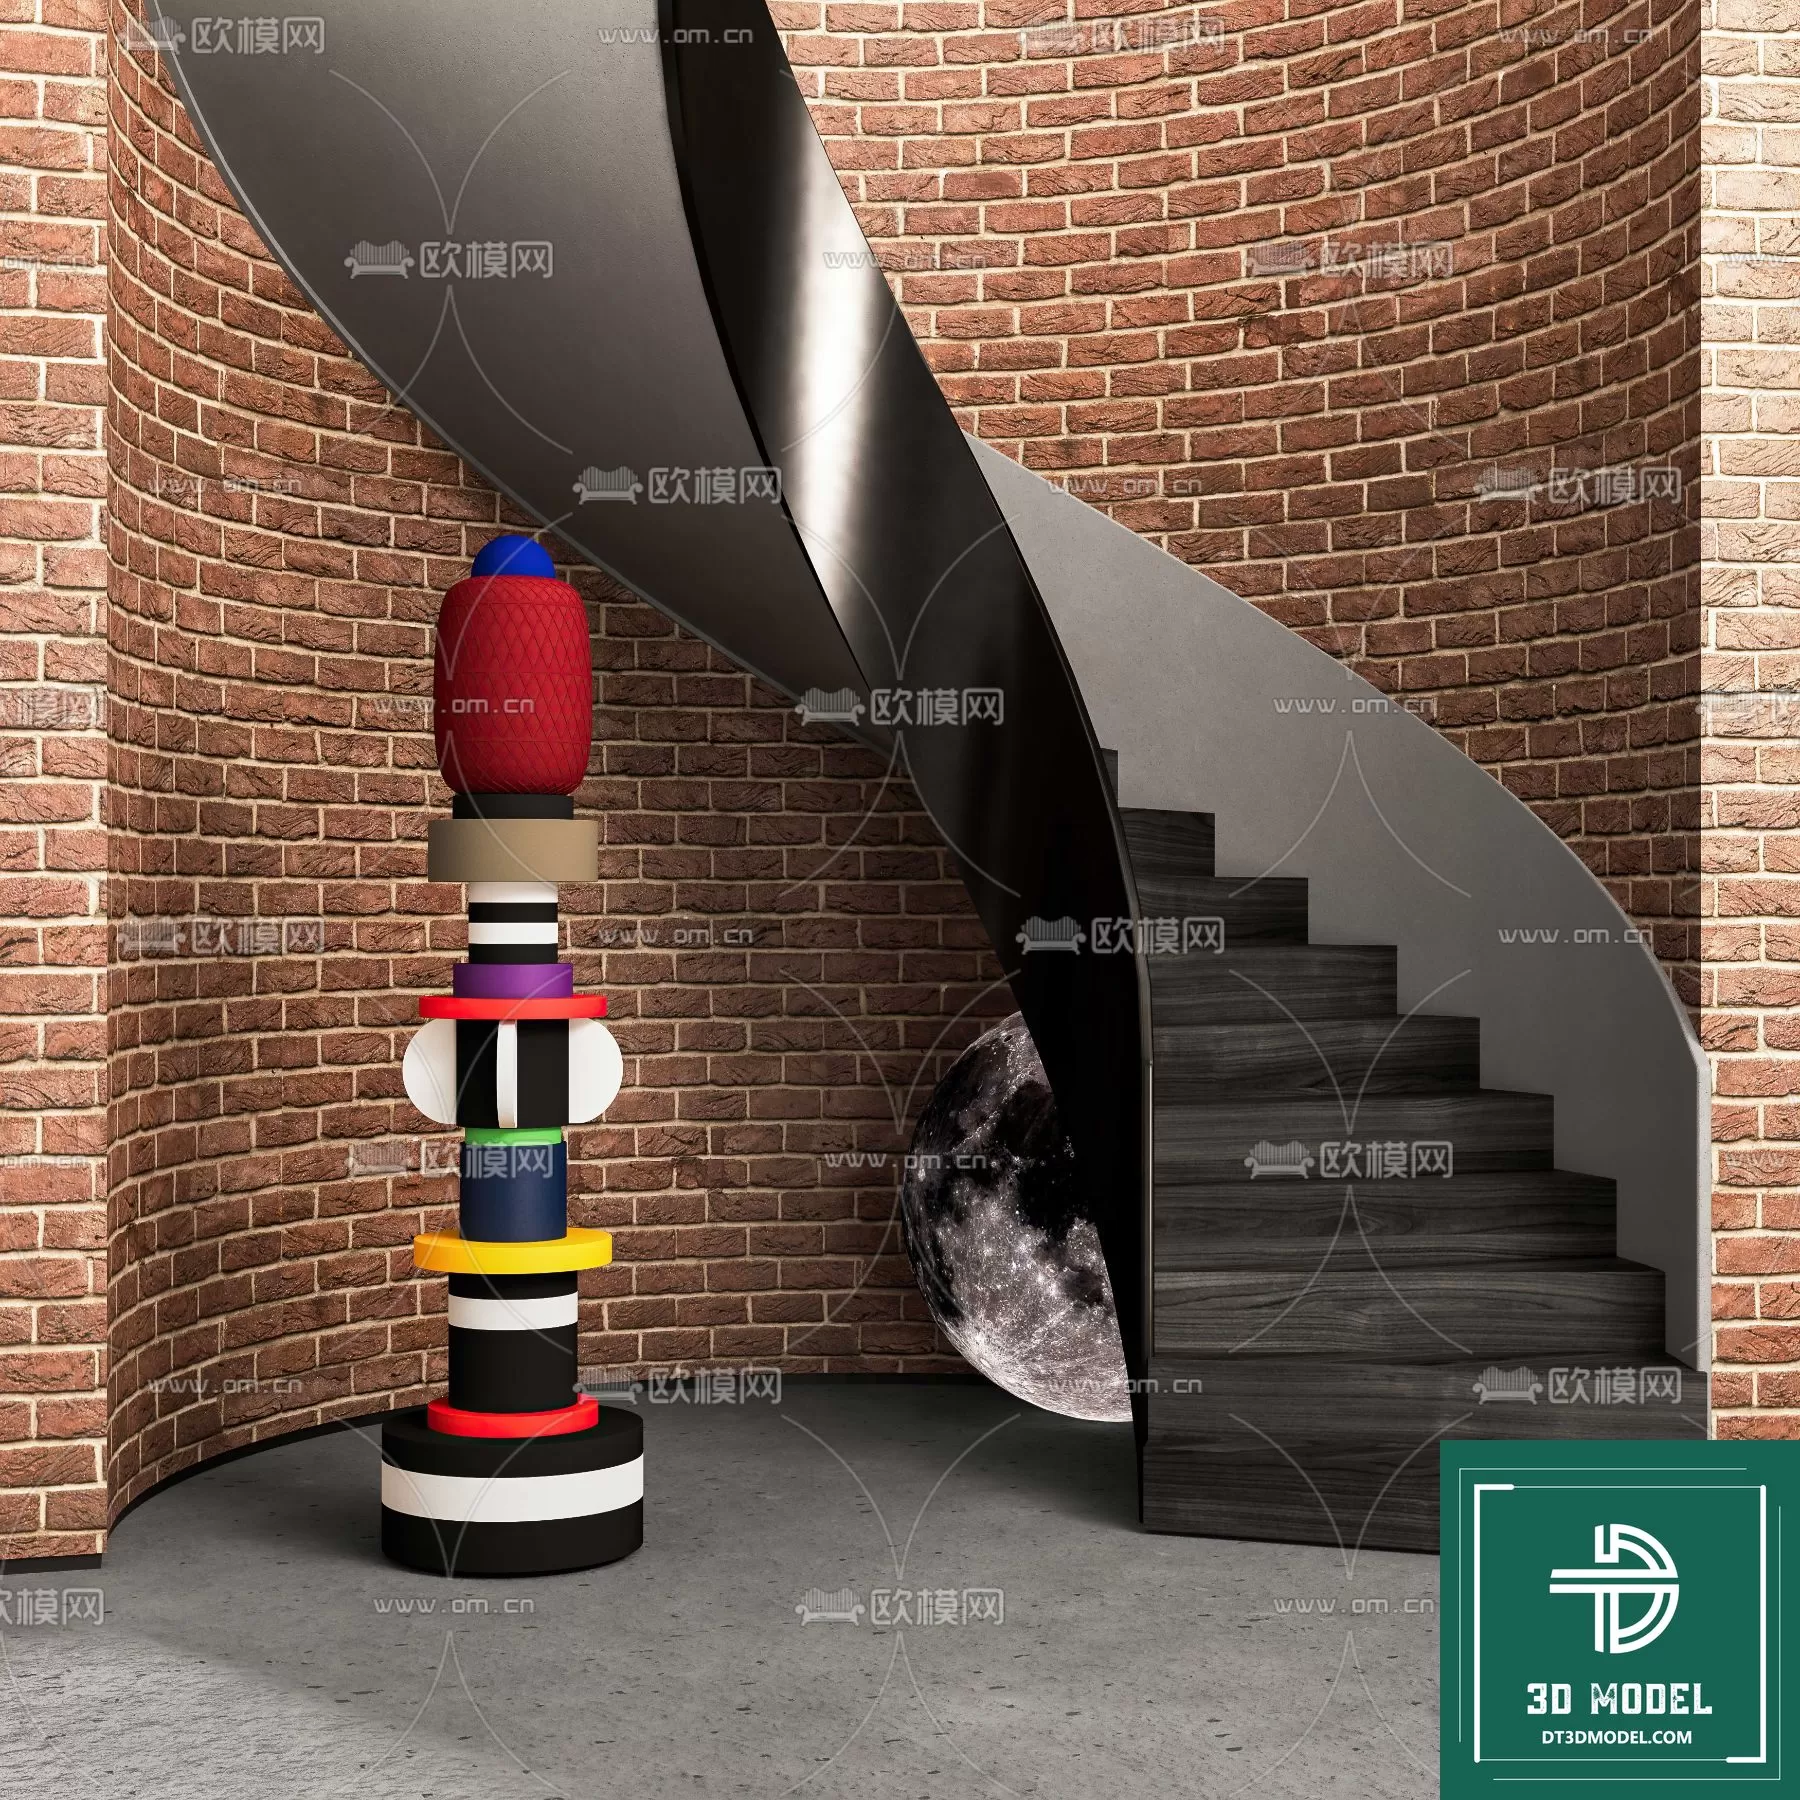 STAIR – 3DS MAX MODELS – 067 – PRO